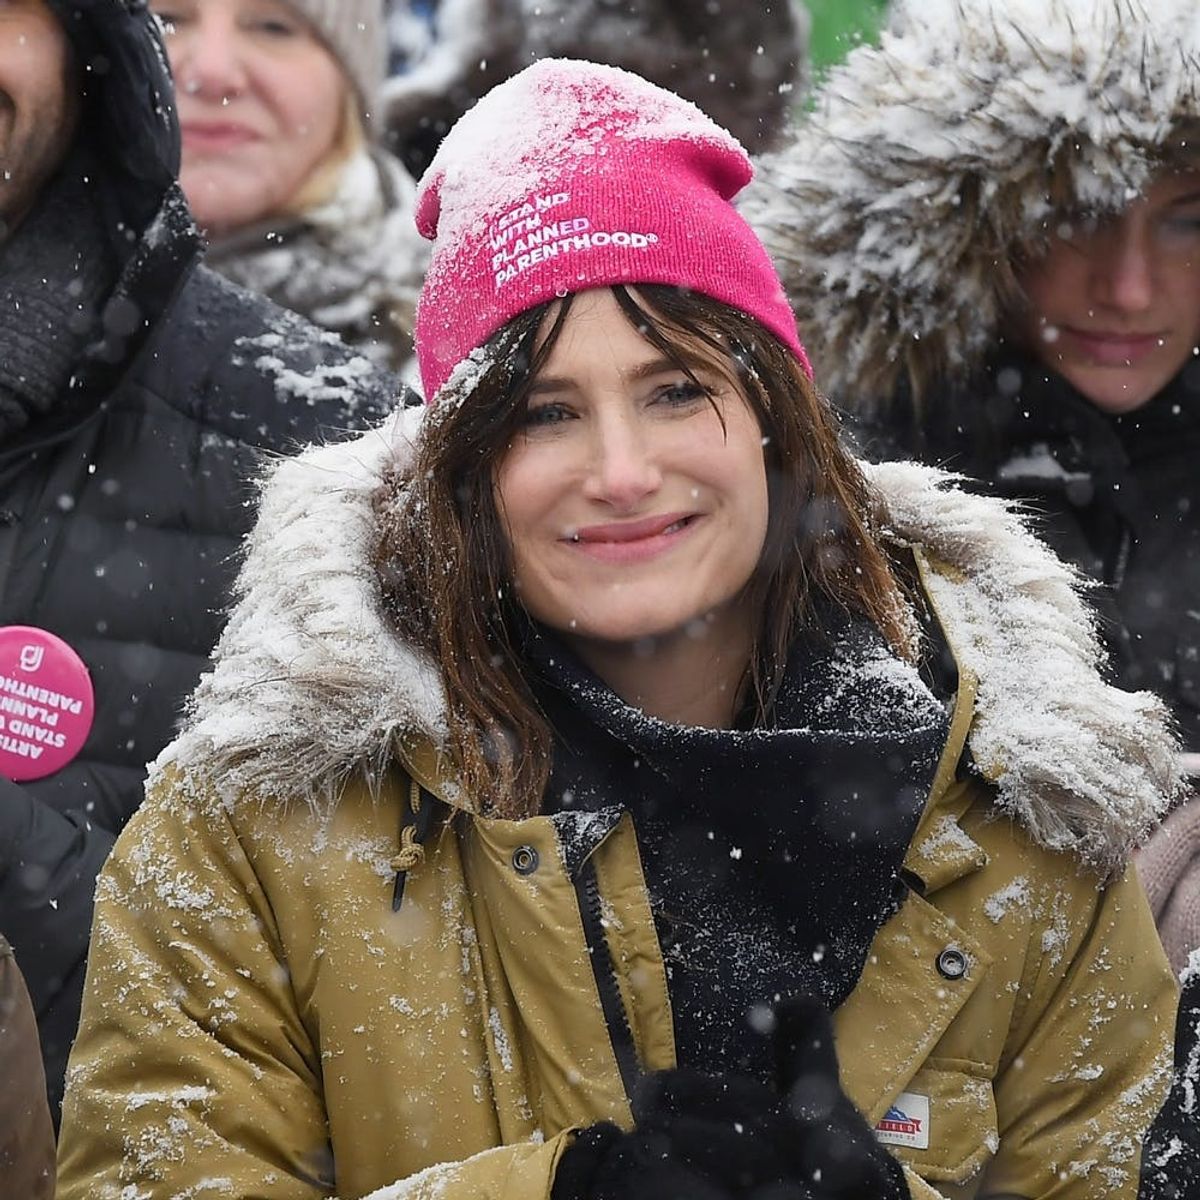 35 Celebrities Who Participated in the Women’s March 2018